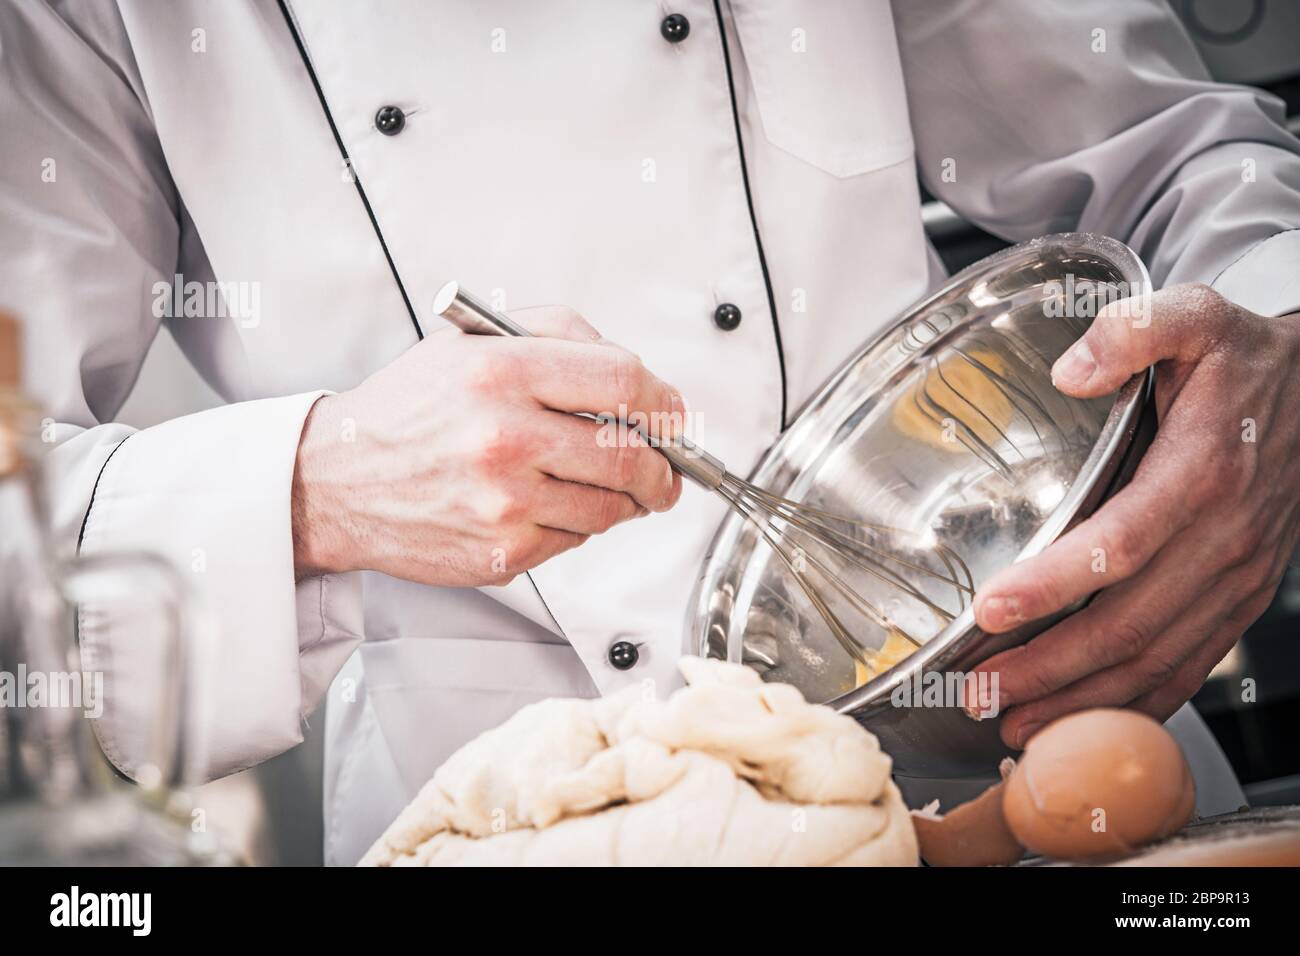 Caucasian Male Chef Mixing Batter With Wire Whisk In Stainless Steel Bowl. Stock Photo